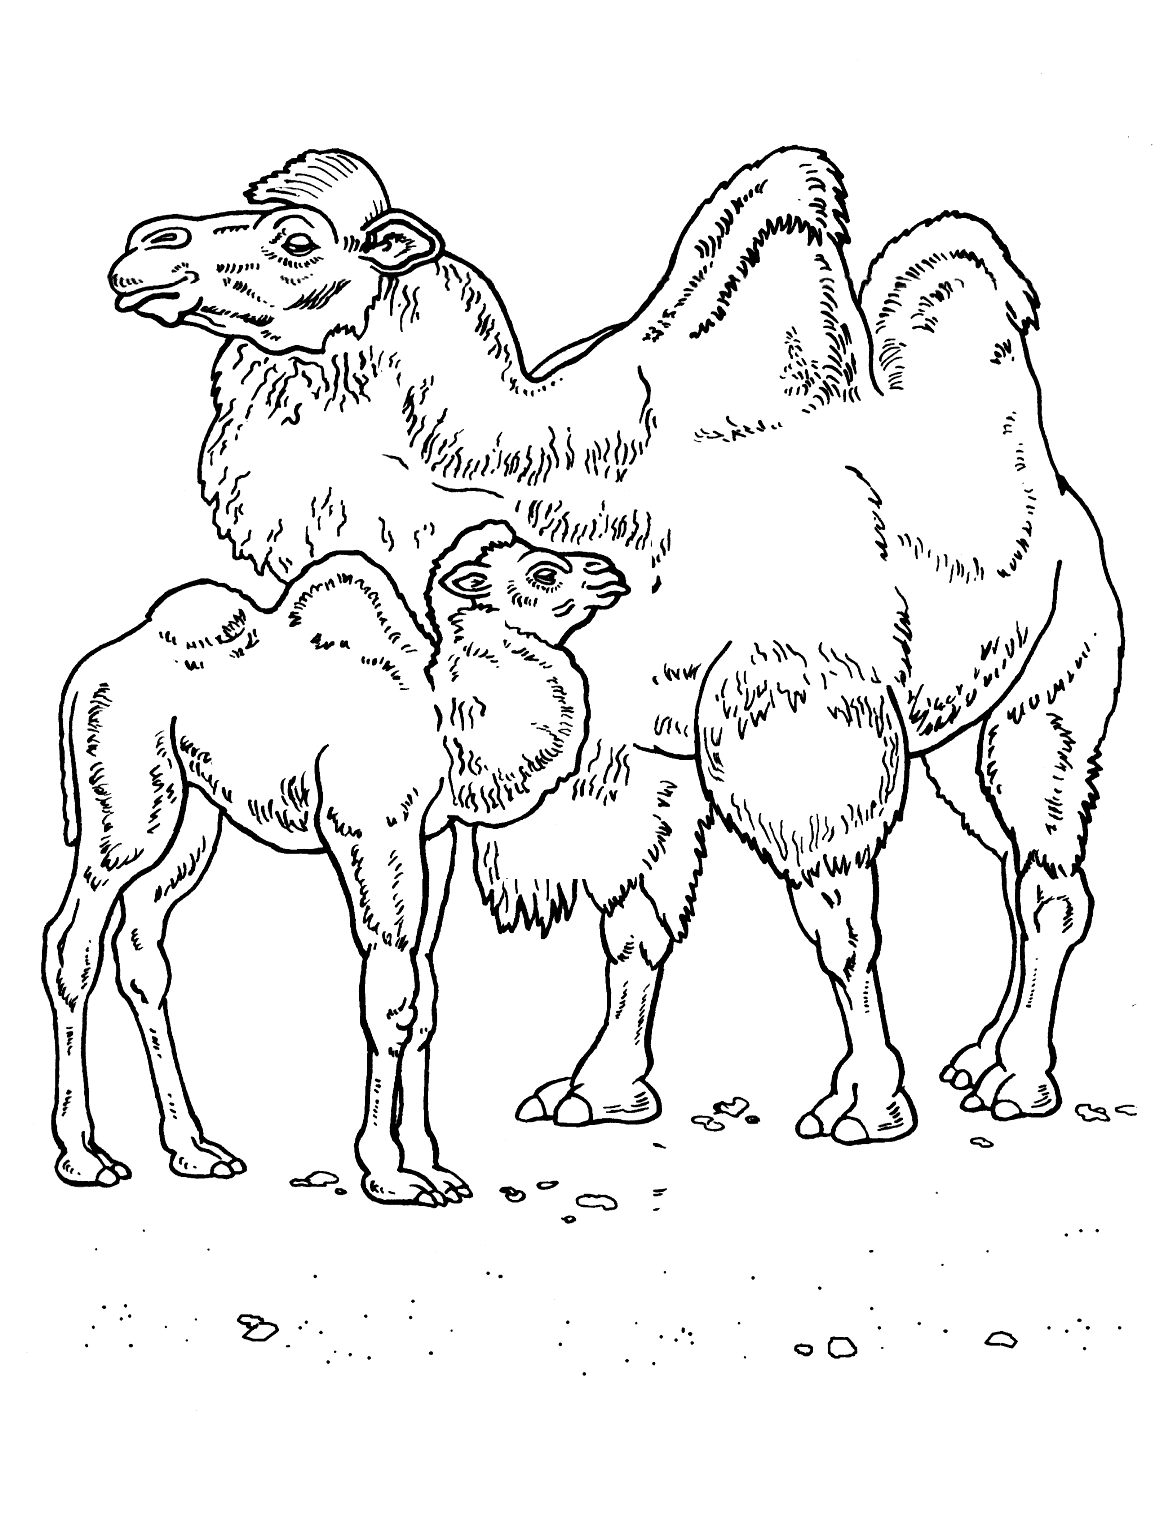 Coloring page - Camels in the desert